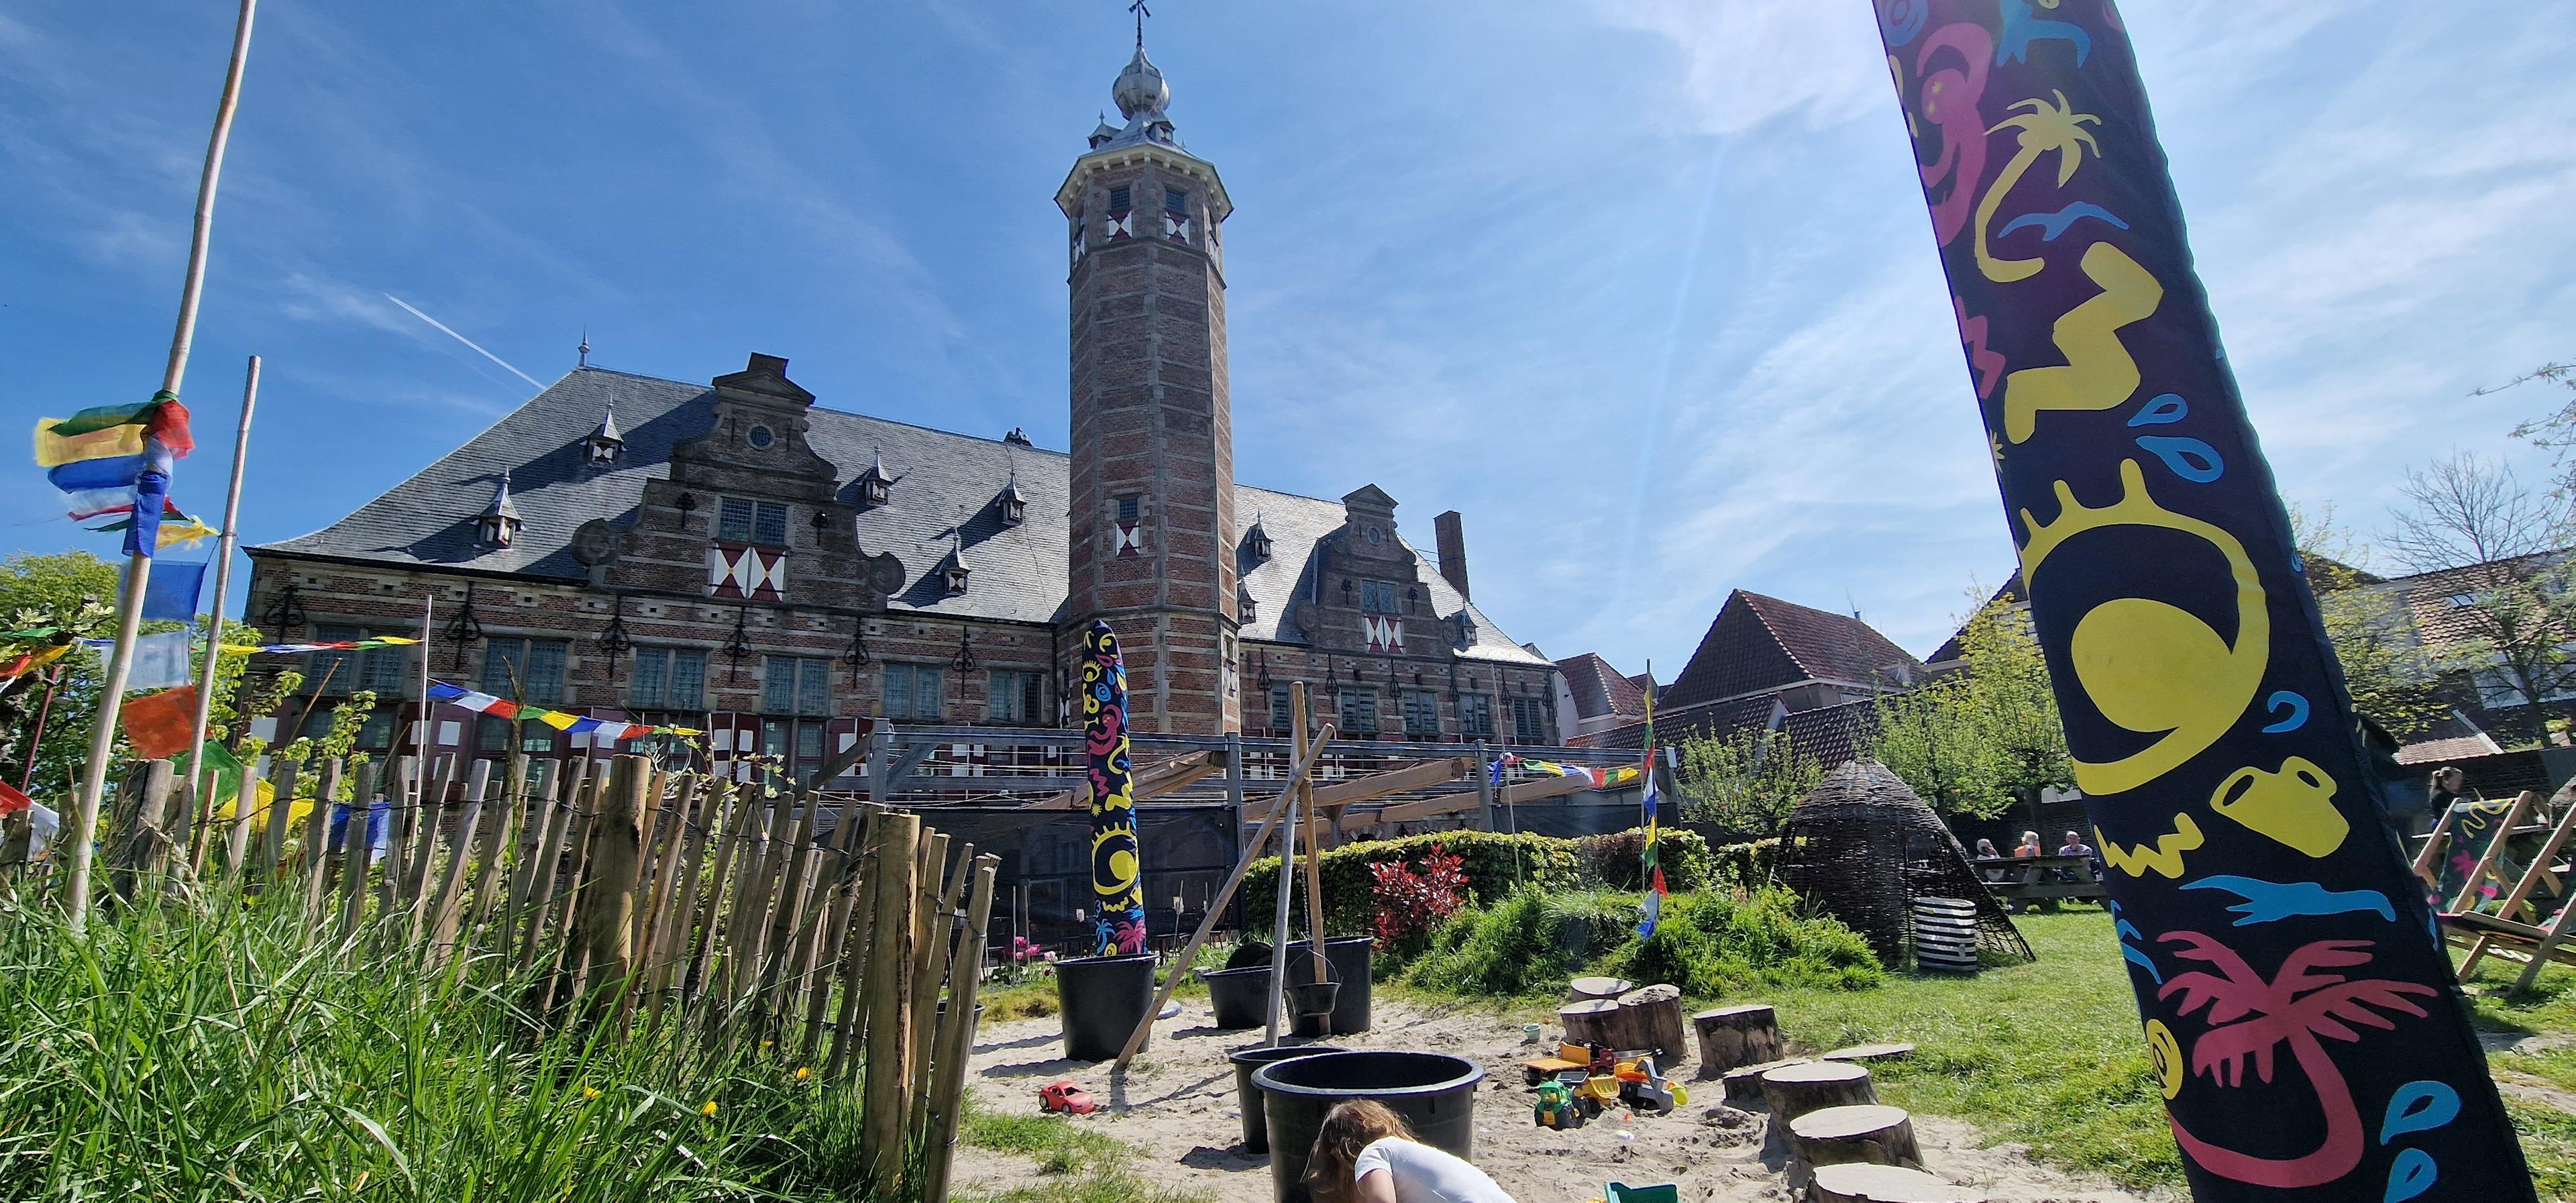 Photo of the garden with the play area with sand and some water in the foreground and the monumental building in the background